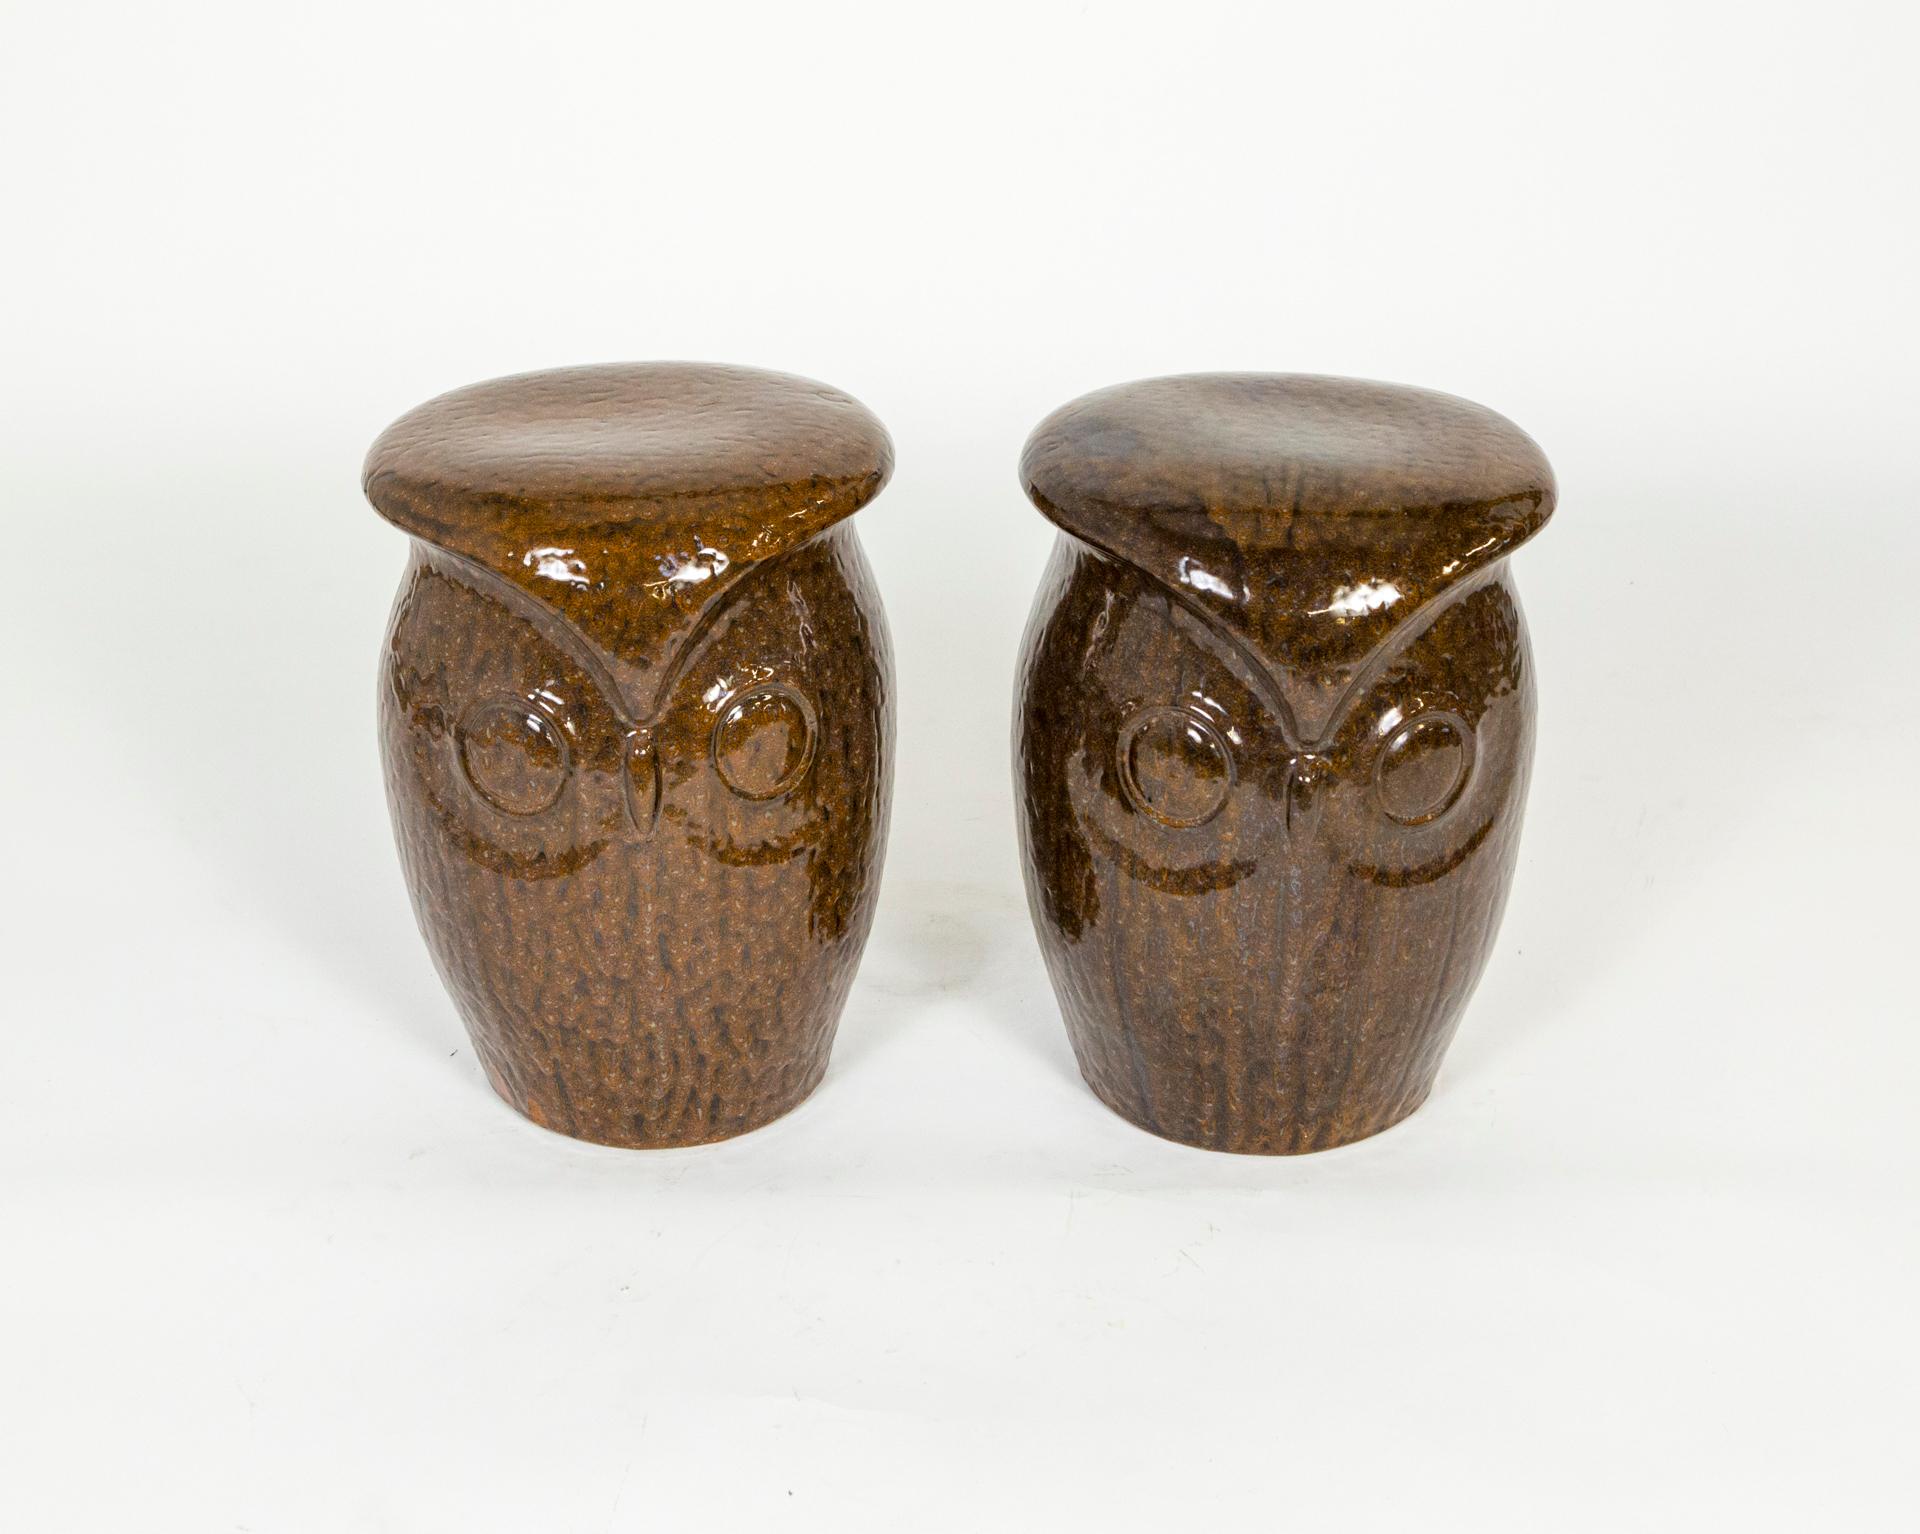 A pair of late 20th century, ceramic, owl garden stools. Each stool has 2 owl faces. Closet inspection of the brown glaze reveals beautifully intricate pattern. Measures: 18” height x 14” diameter.